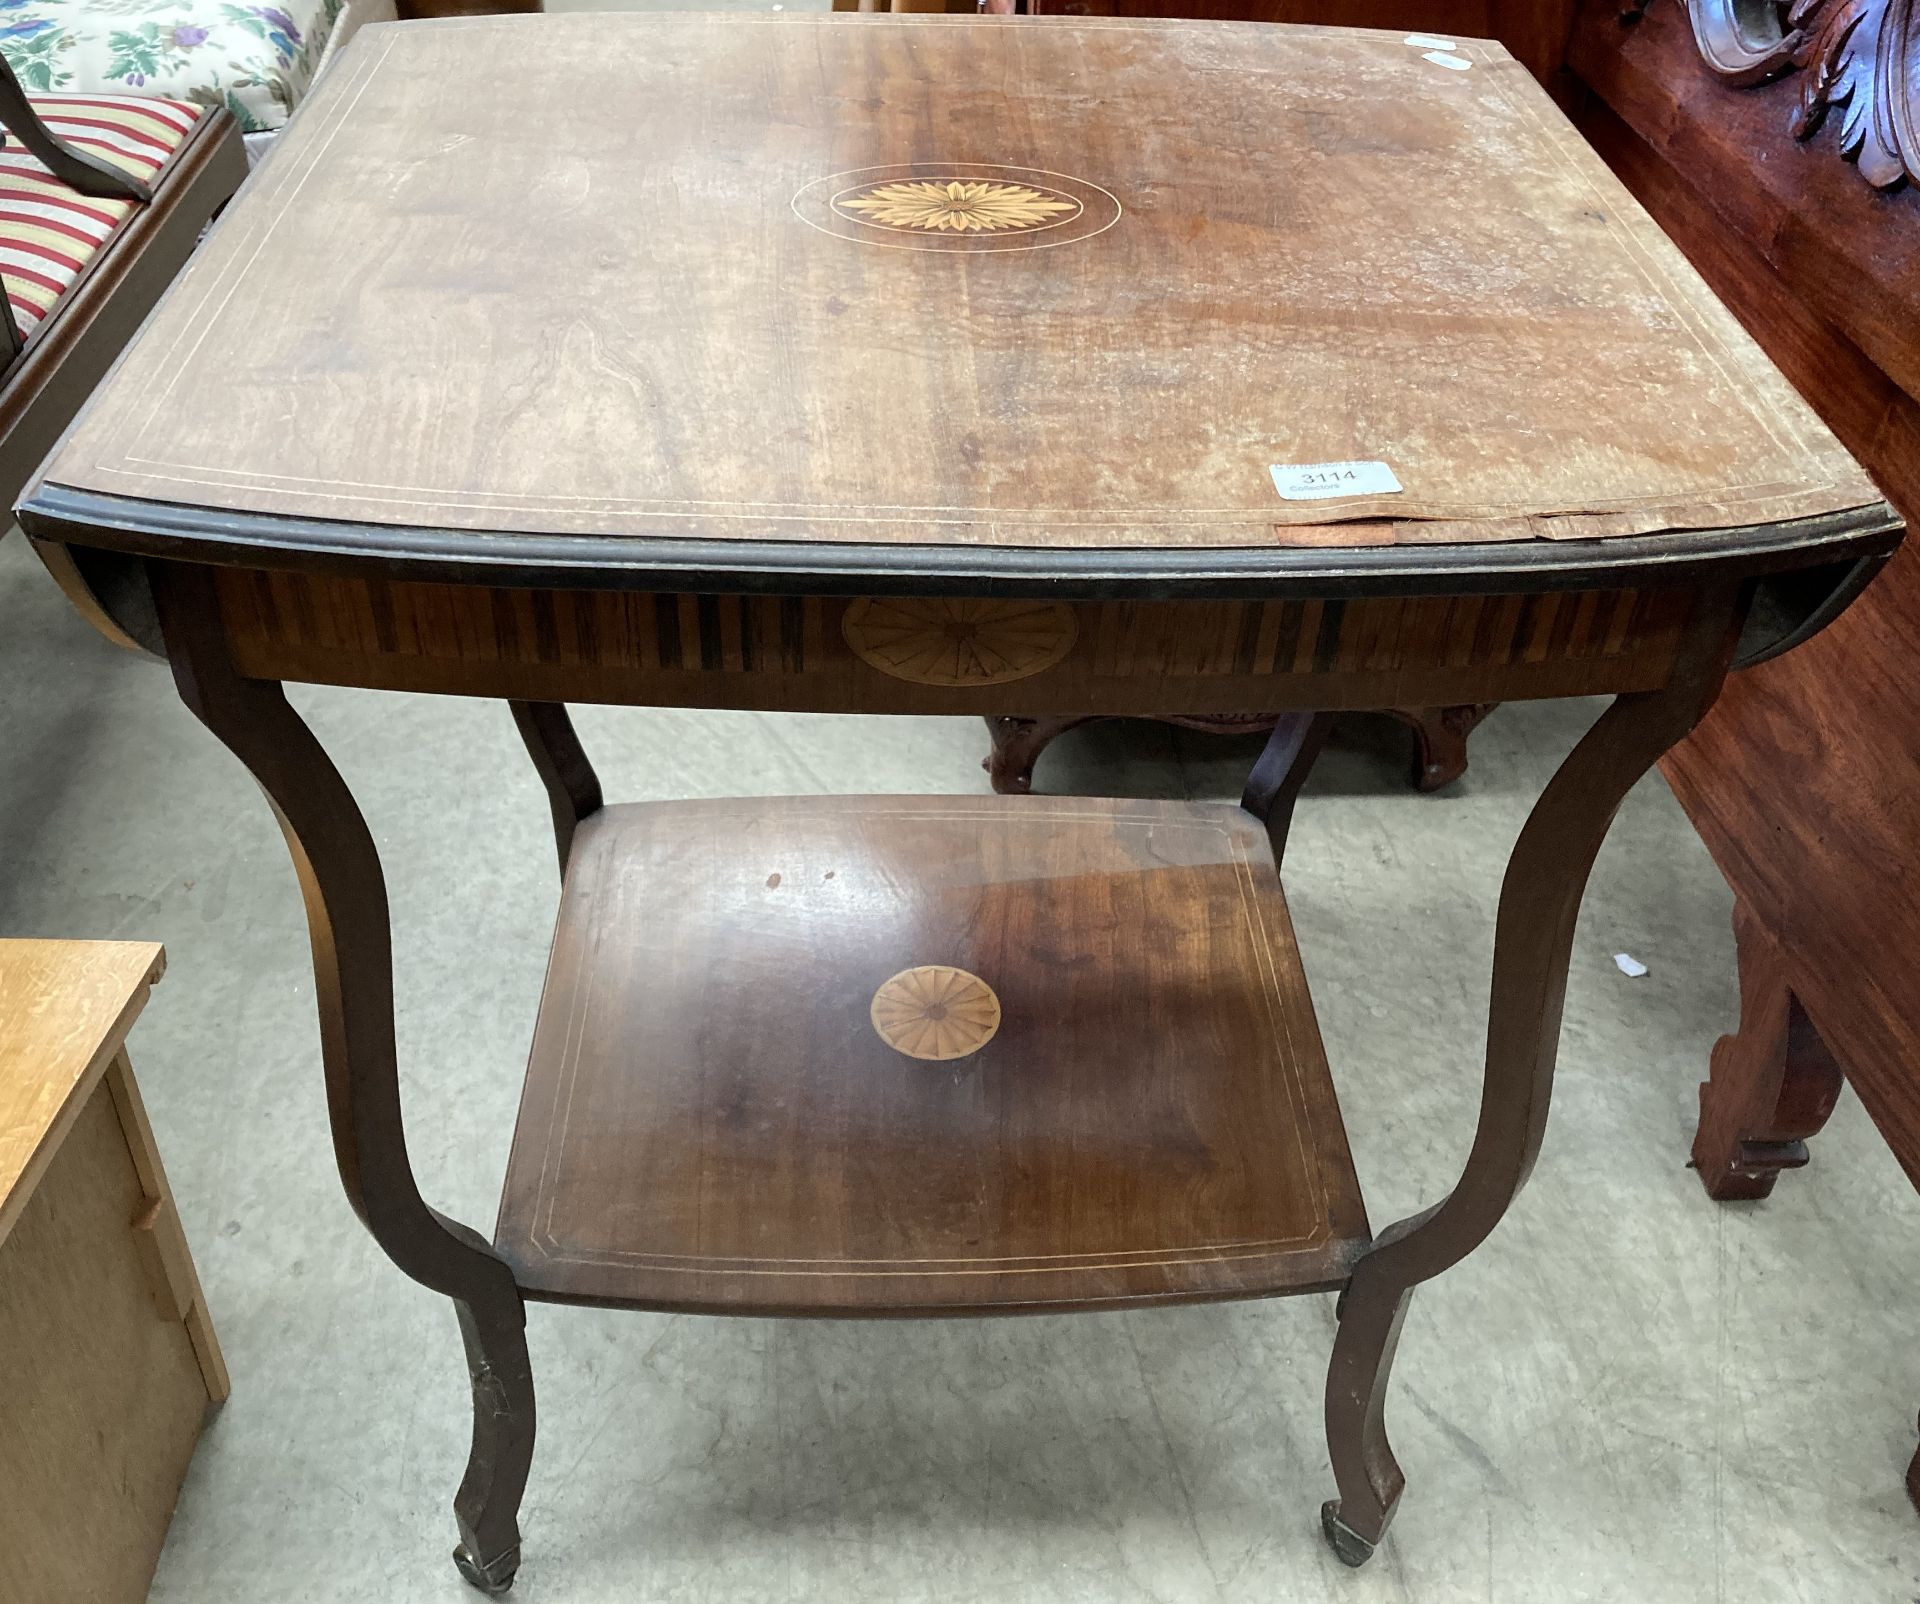 An Edwardian inlaid rosewood drop leaf occasional table with an undershelf missing some veneer 53cm